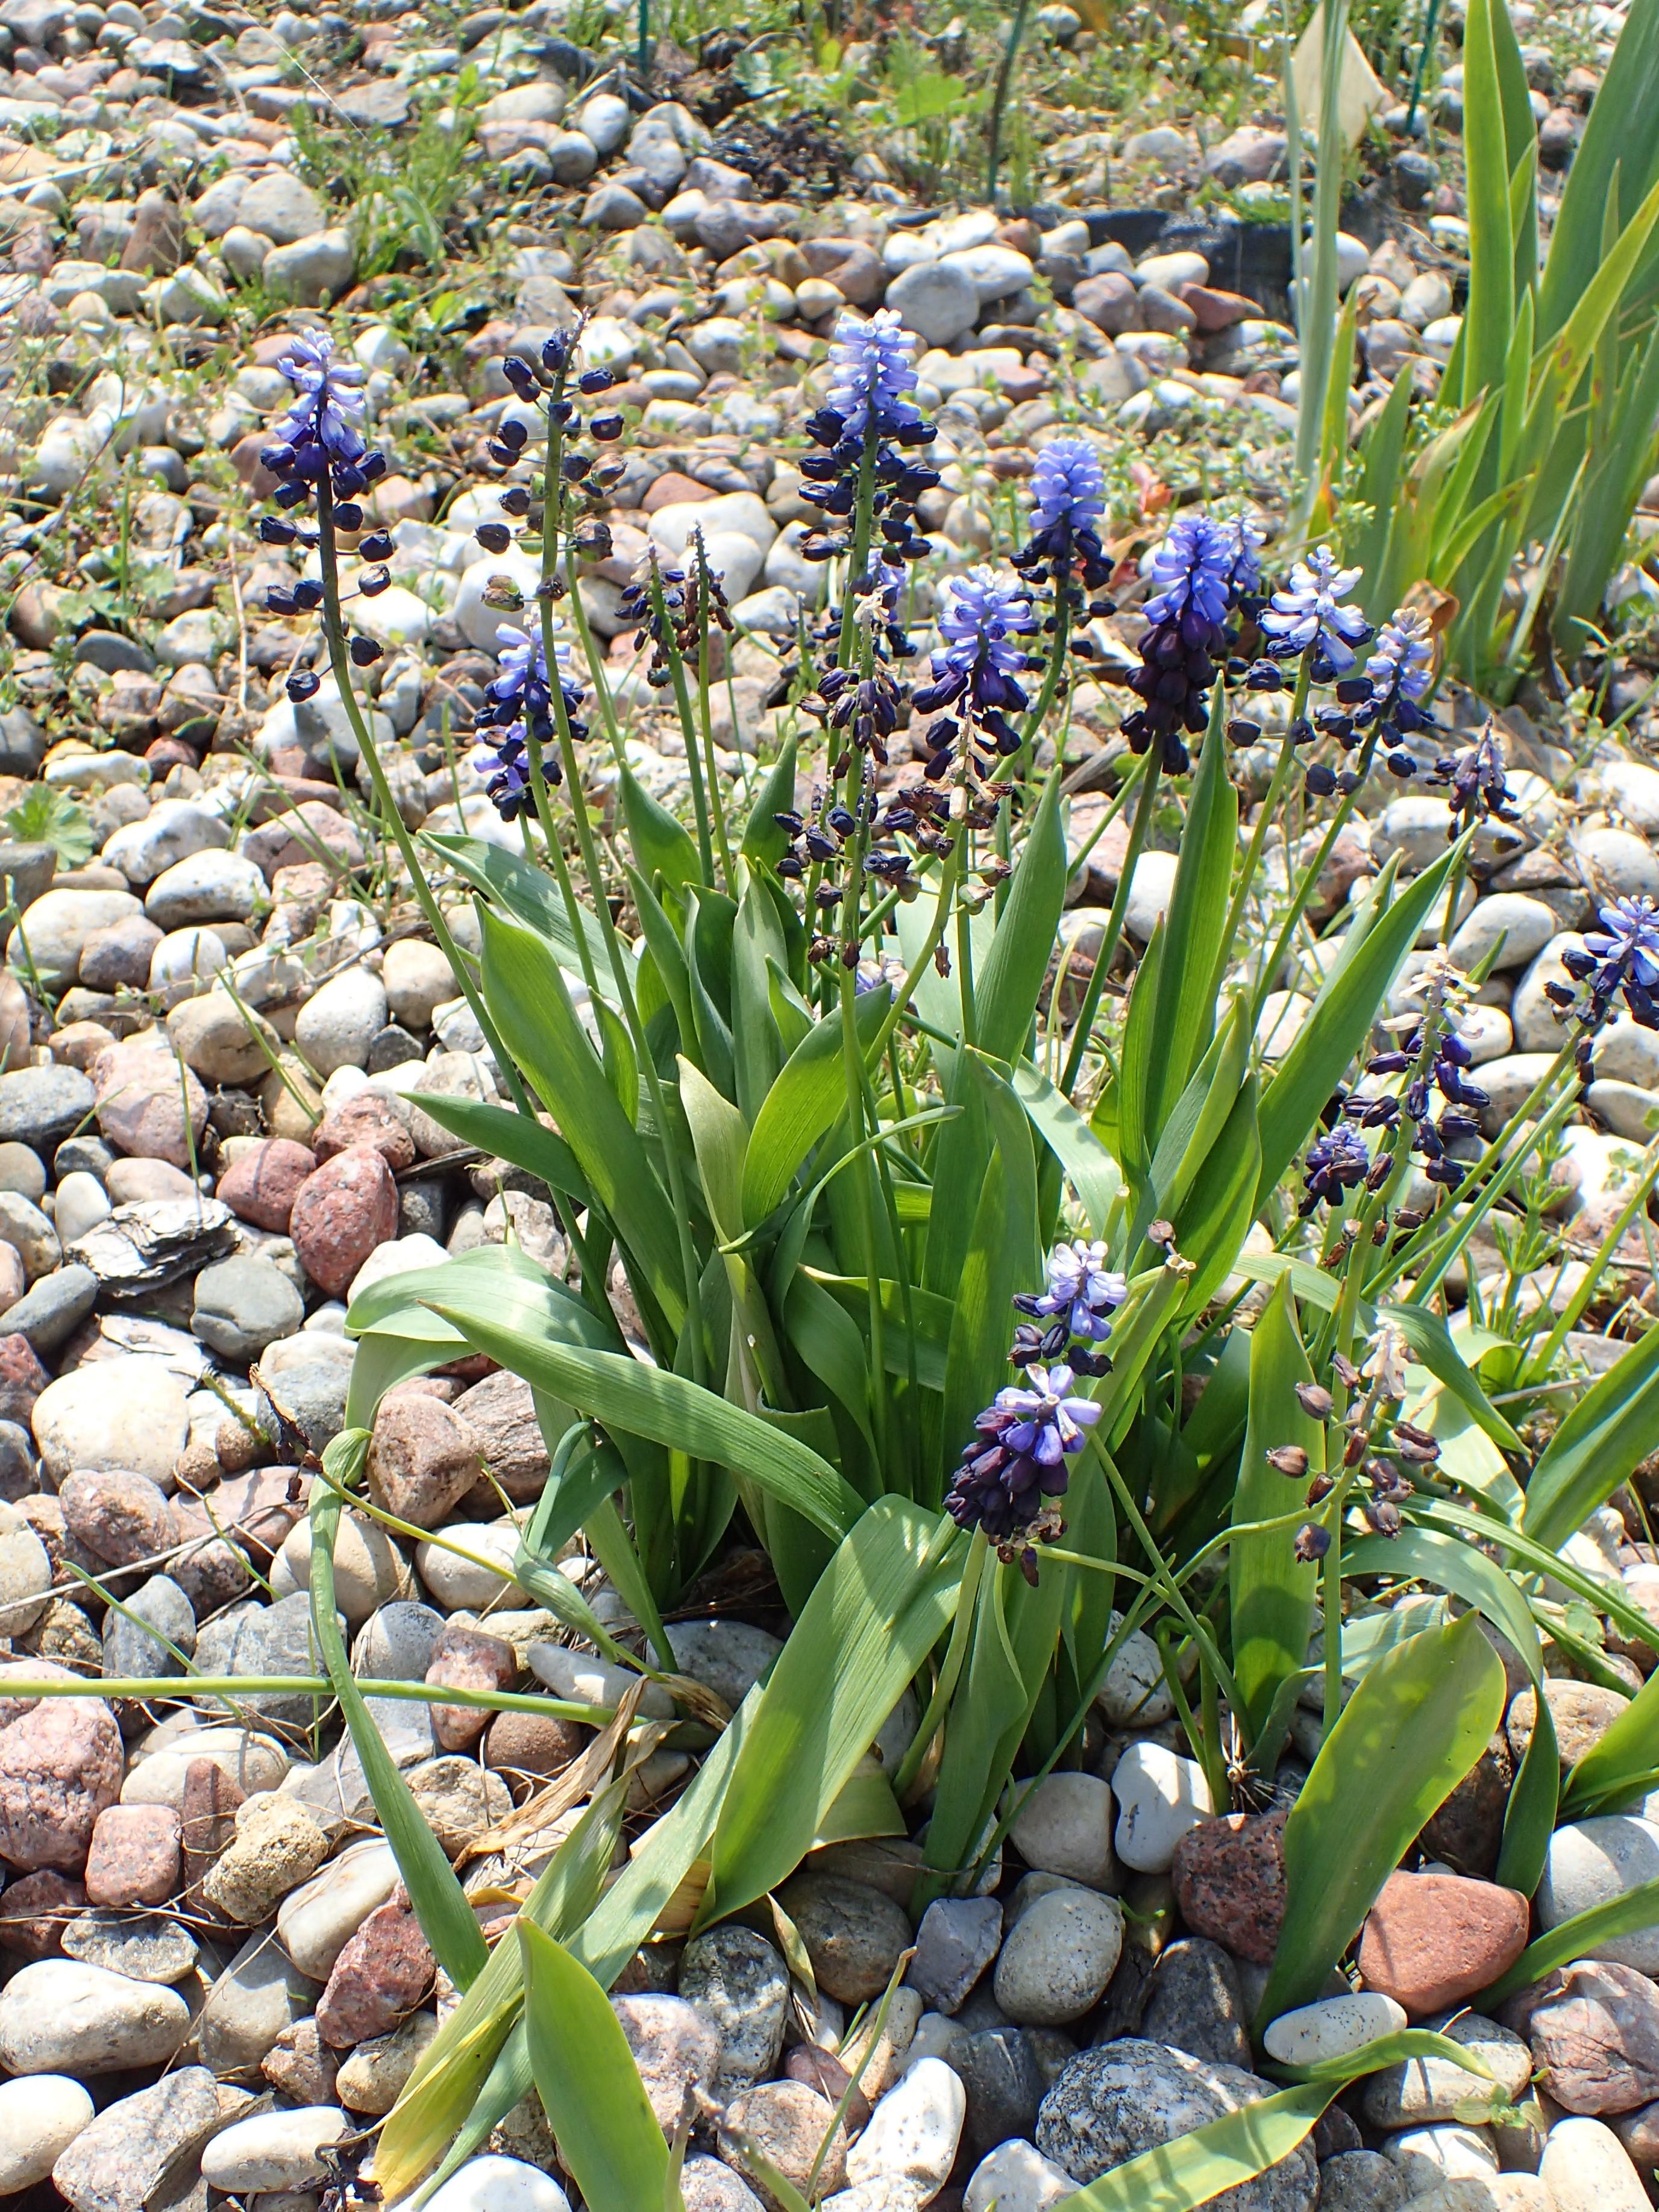 Violet flowers, with dark-blue buds, green leaves and stems.